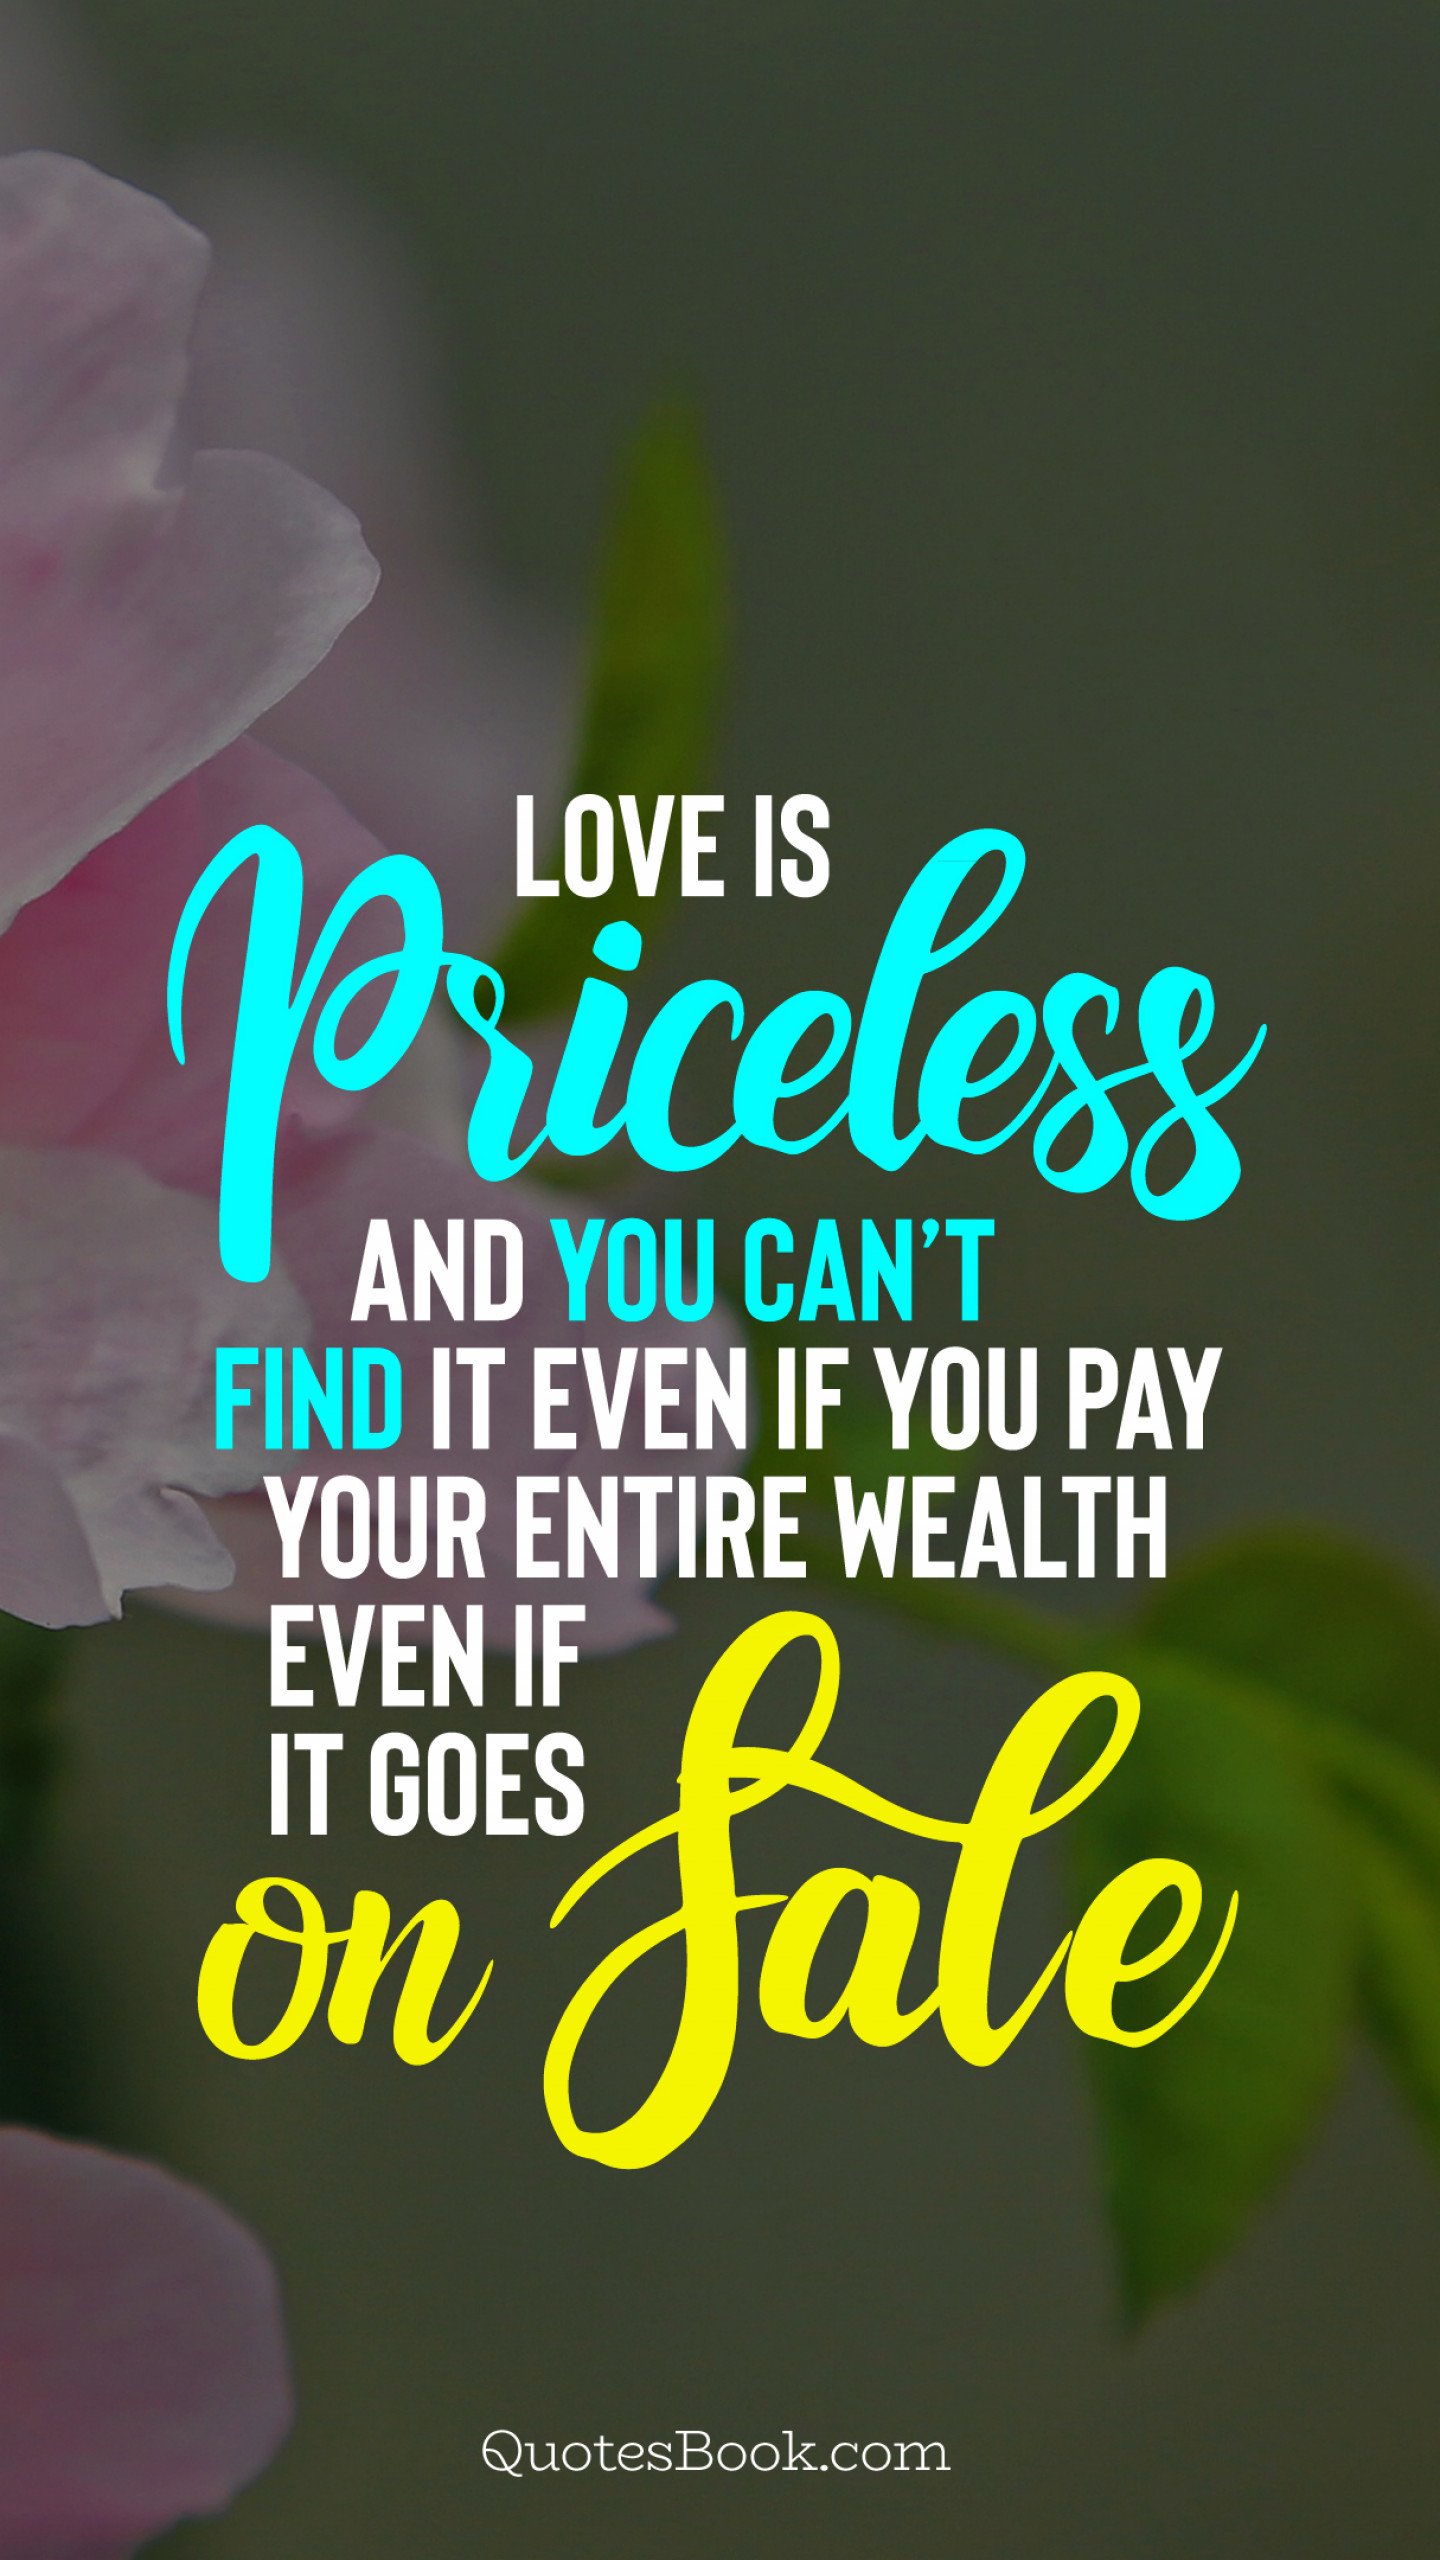 Love is priceless and you can’t find it even if you pay your entire